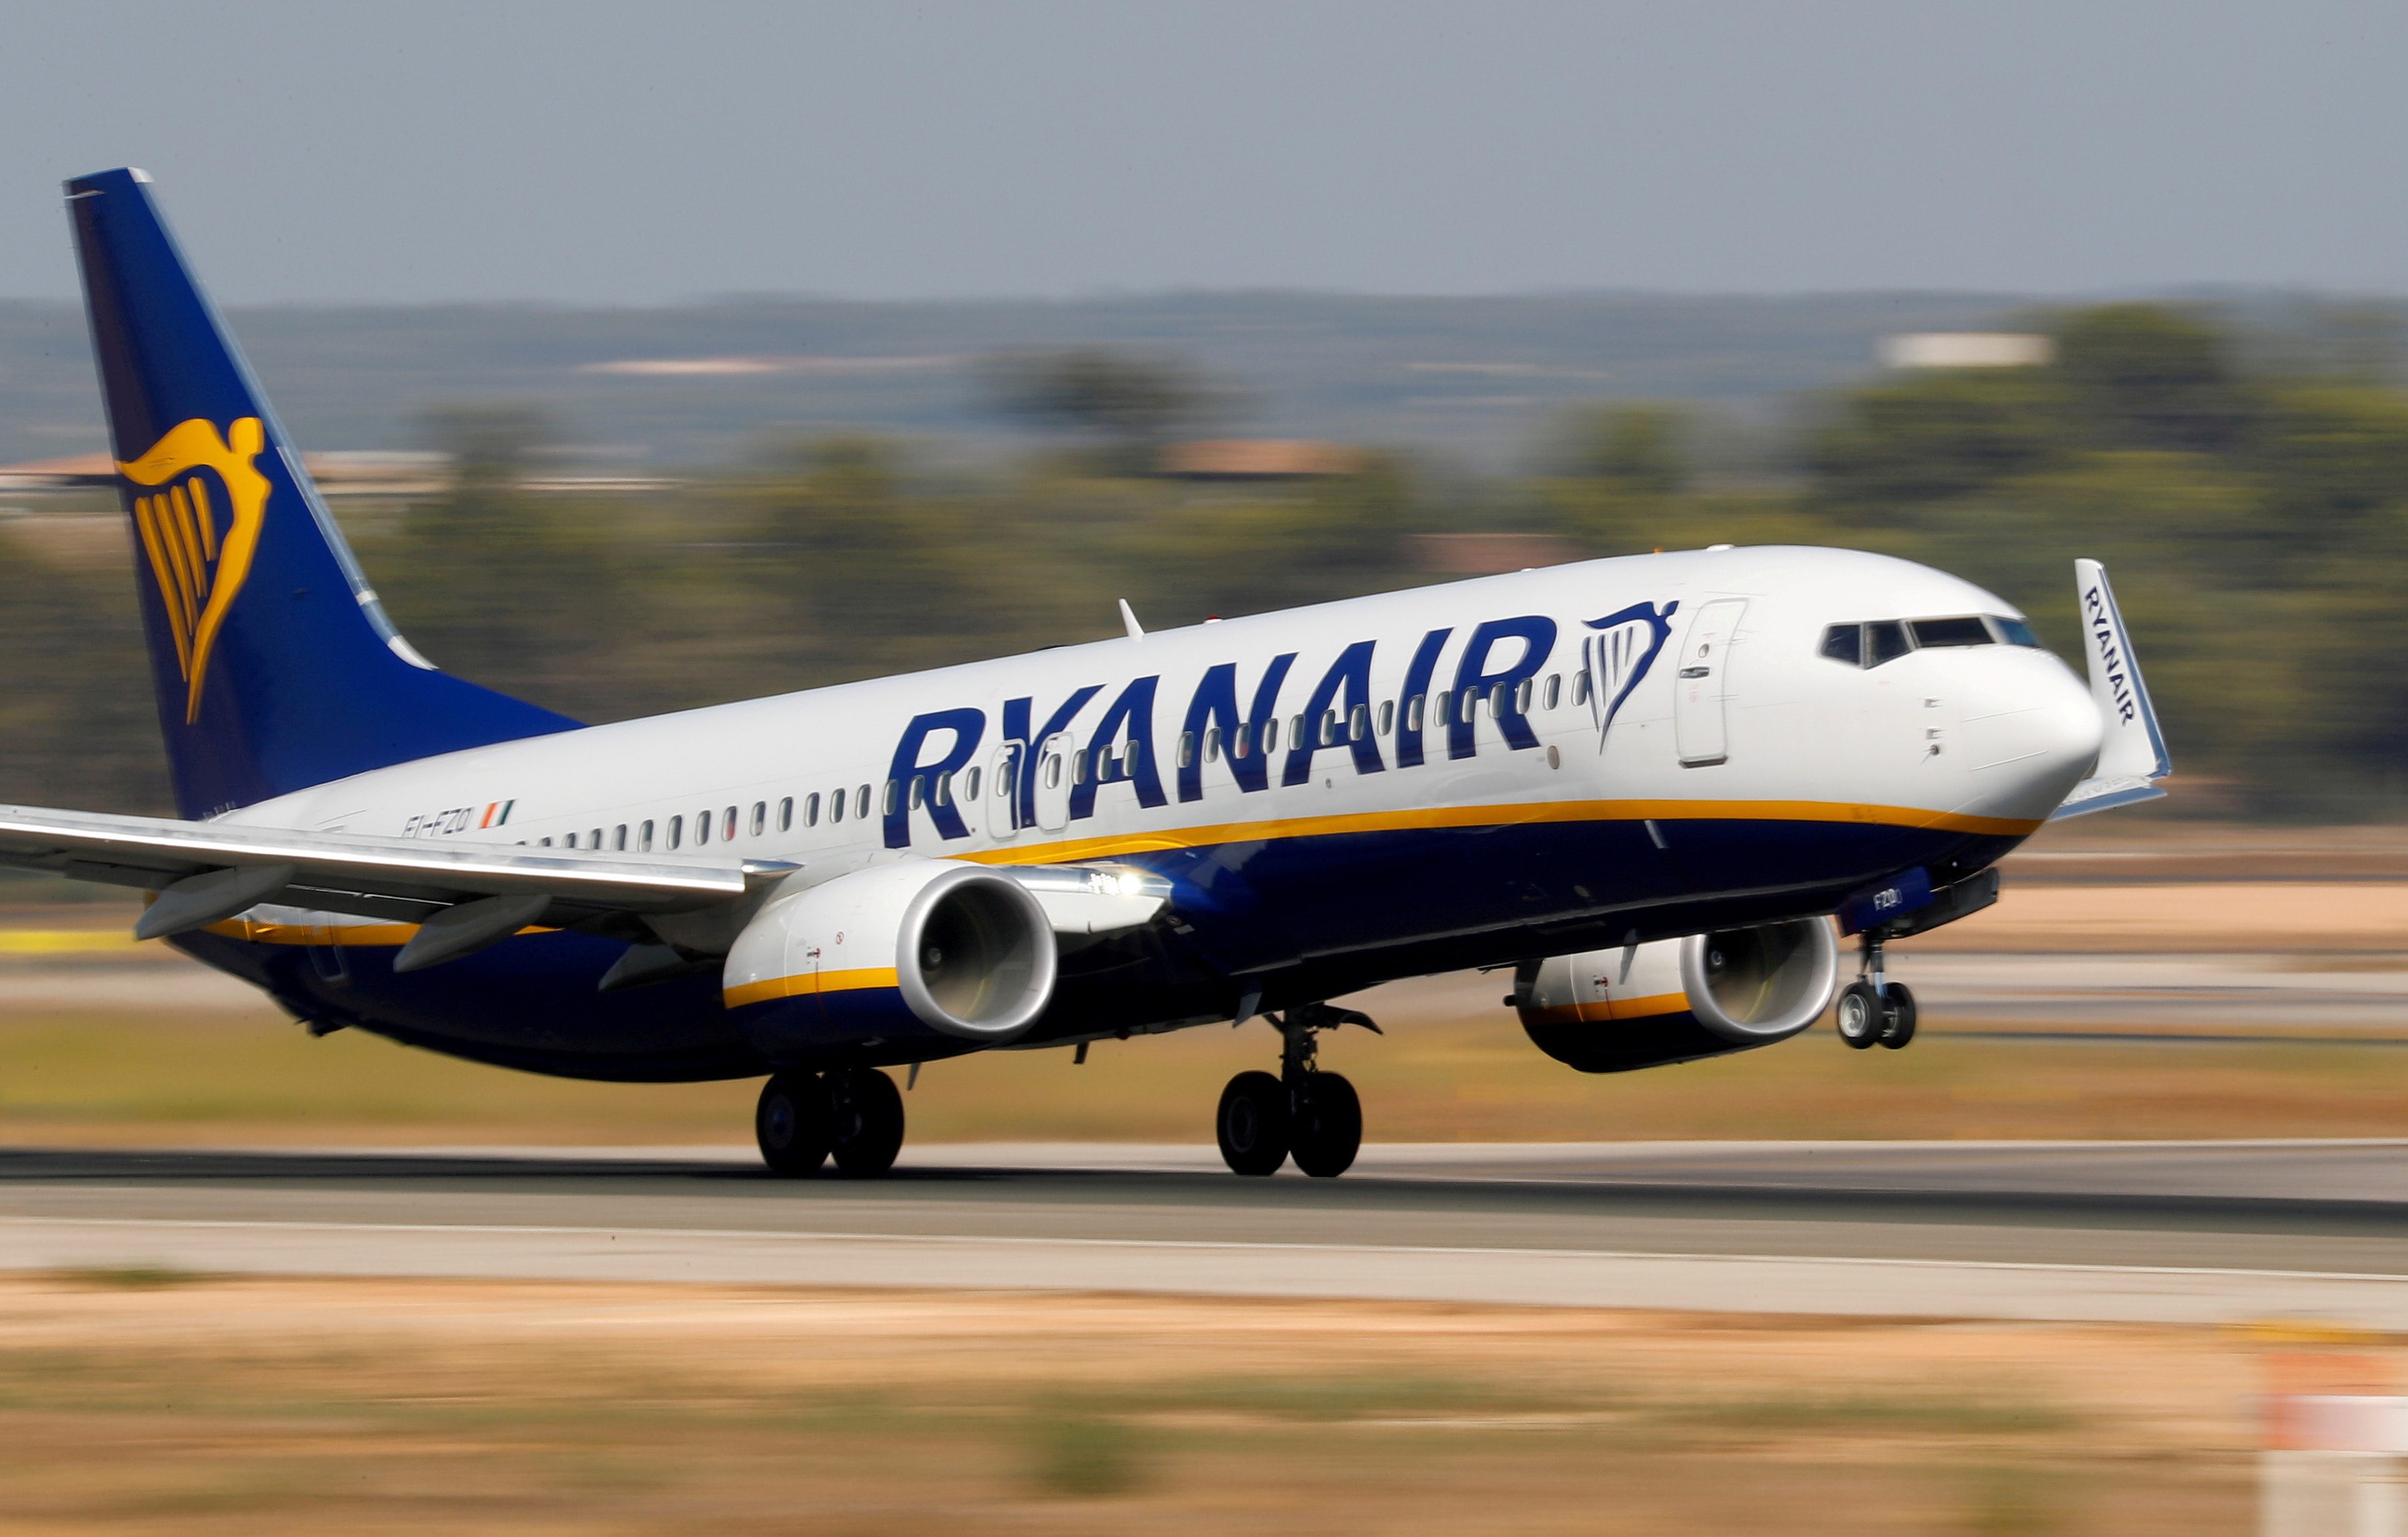 Ryanair loses court challenges to SAS, Finnair state aid in new setbacks